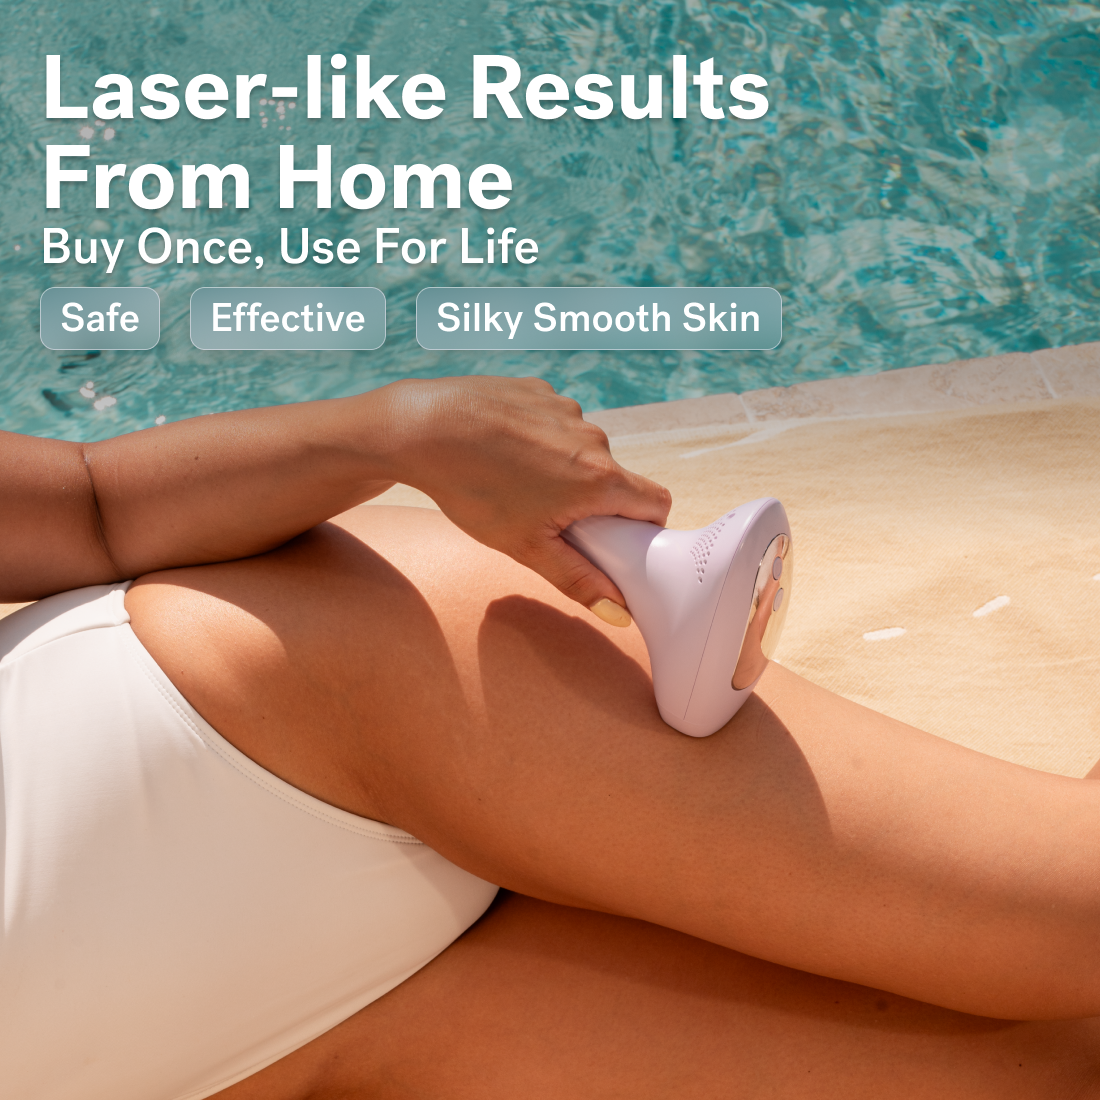 Lavender Lust - A person in a swimsuit uses a Lumos IPL handheld device on their leg by a pool, promoting at-home laser-like hair removal with Intensive Pulse Light technology. The text "Safe, Effective, Silky Smooth Skin" and "Buy Once, Use For Life" appears above.